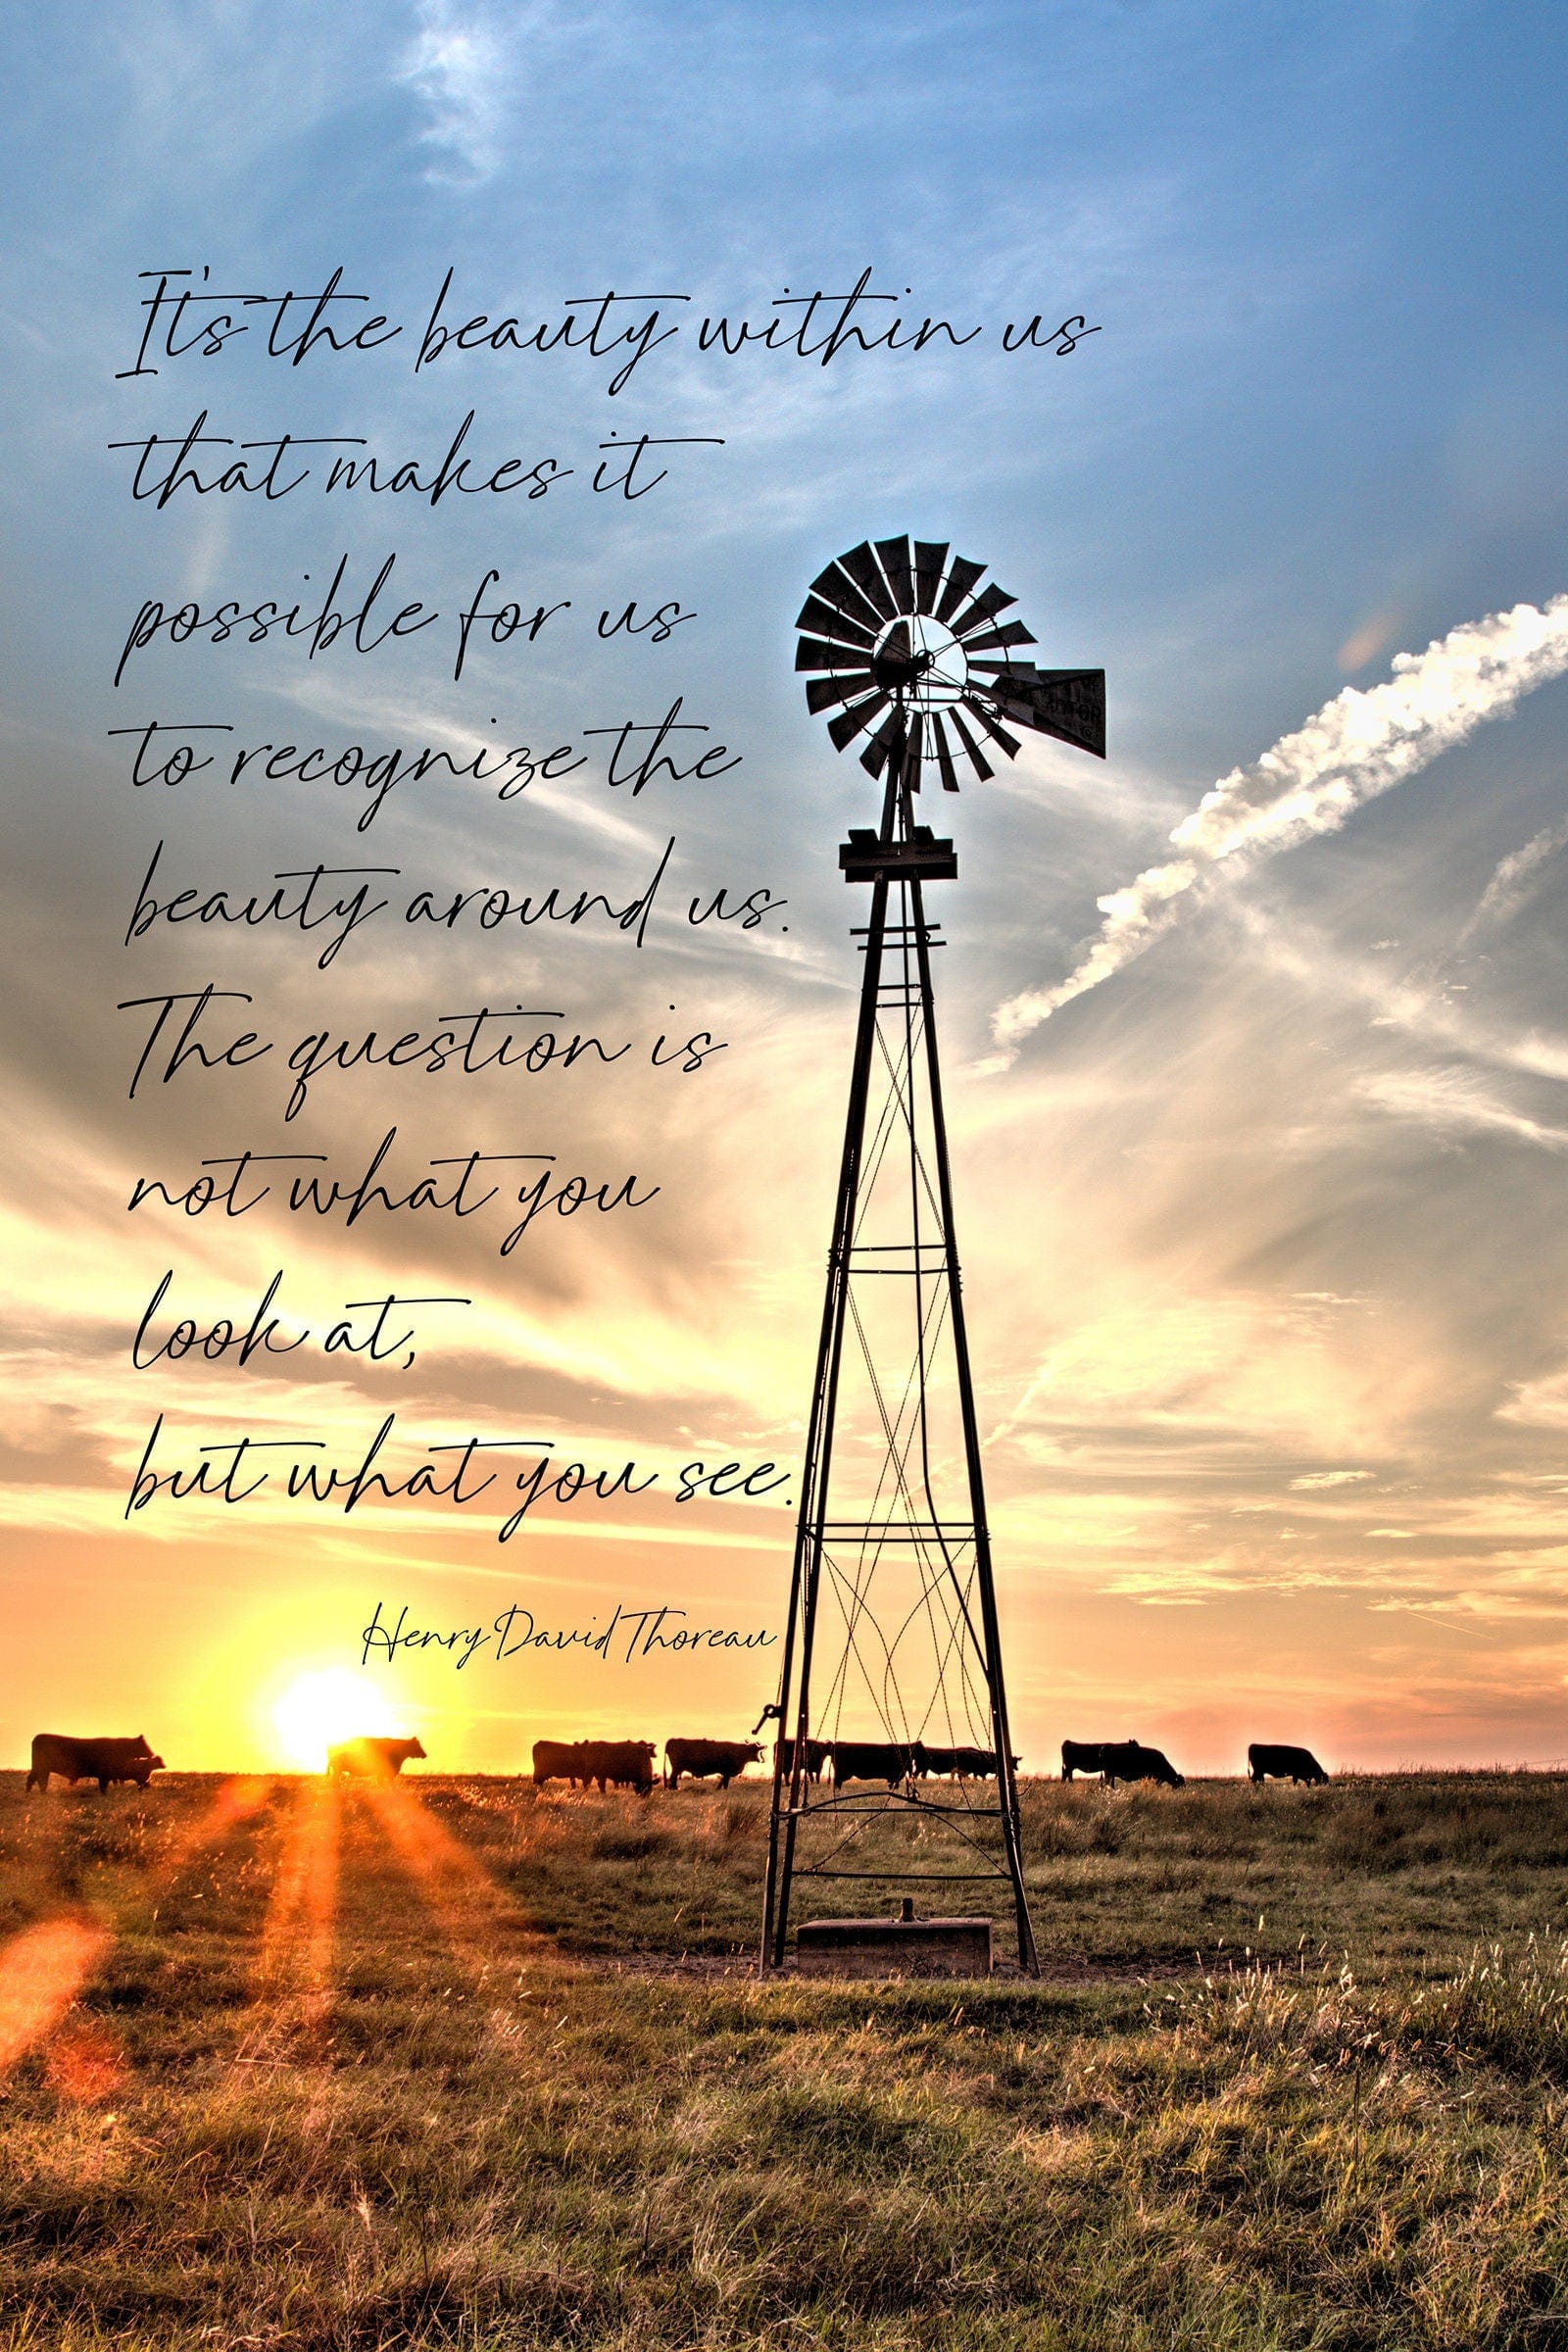 Henry David Thoreau Quote - Old Windmill Art Paper Photo Print / 12 x 18 Inches Wall Art Teri James Photography